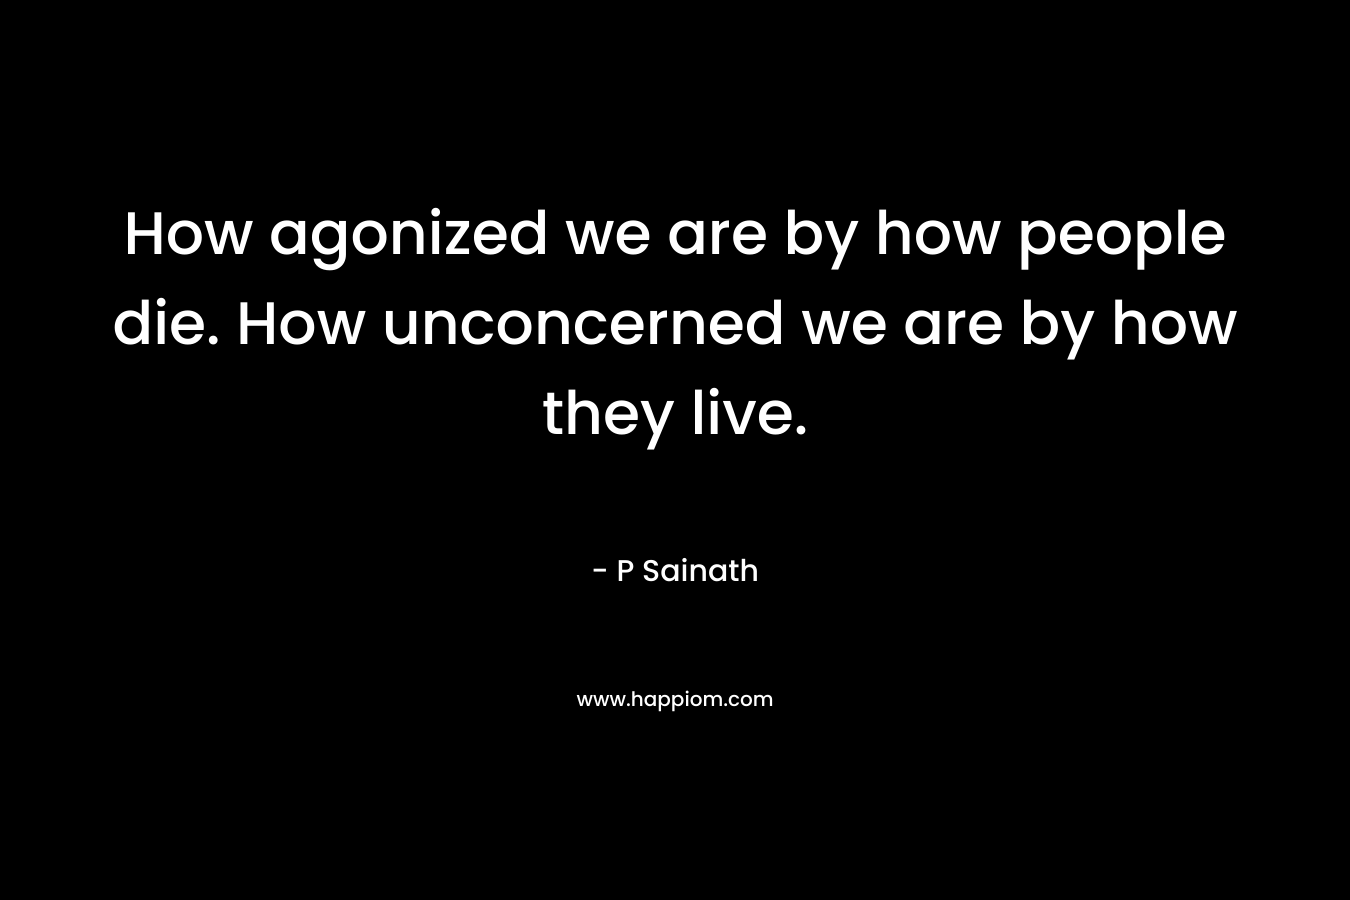 How agonized we are by how people die. How unconcerned we are by how they live. – P Sainath